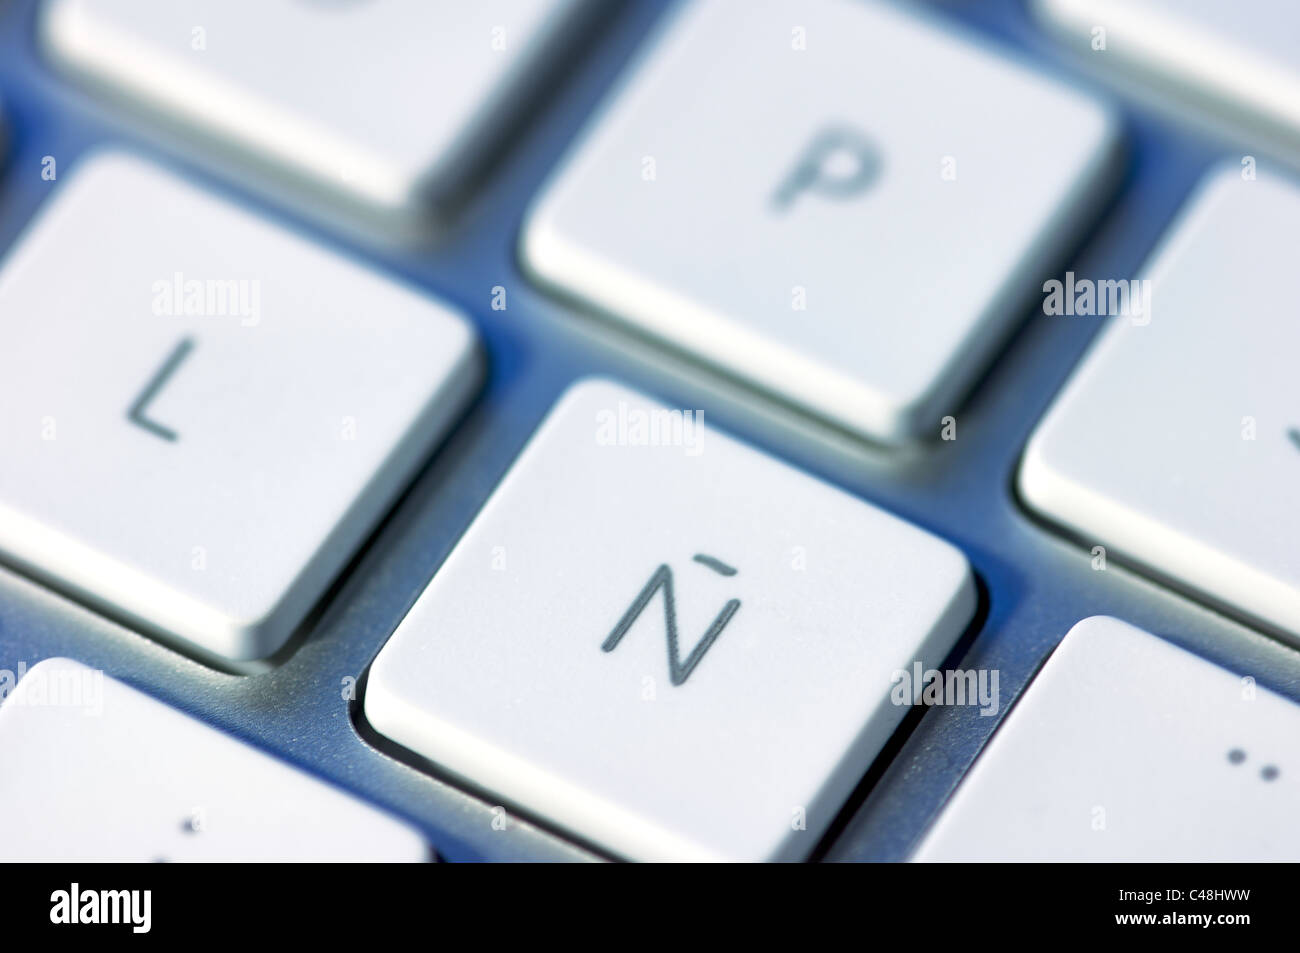 letter ñ on a keyboard, special character of the Spanish language Stock  Photo - Alamy